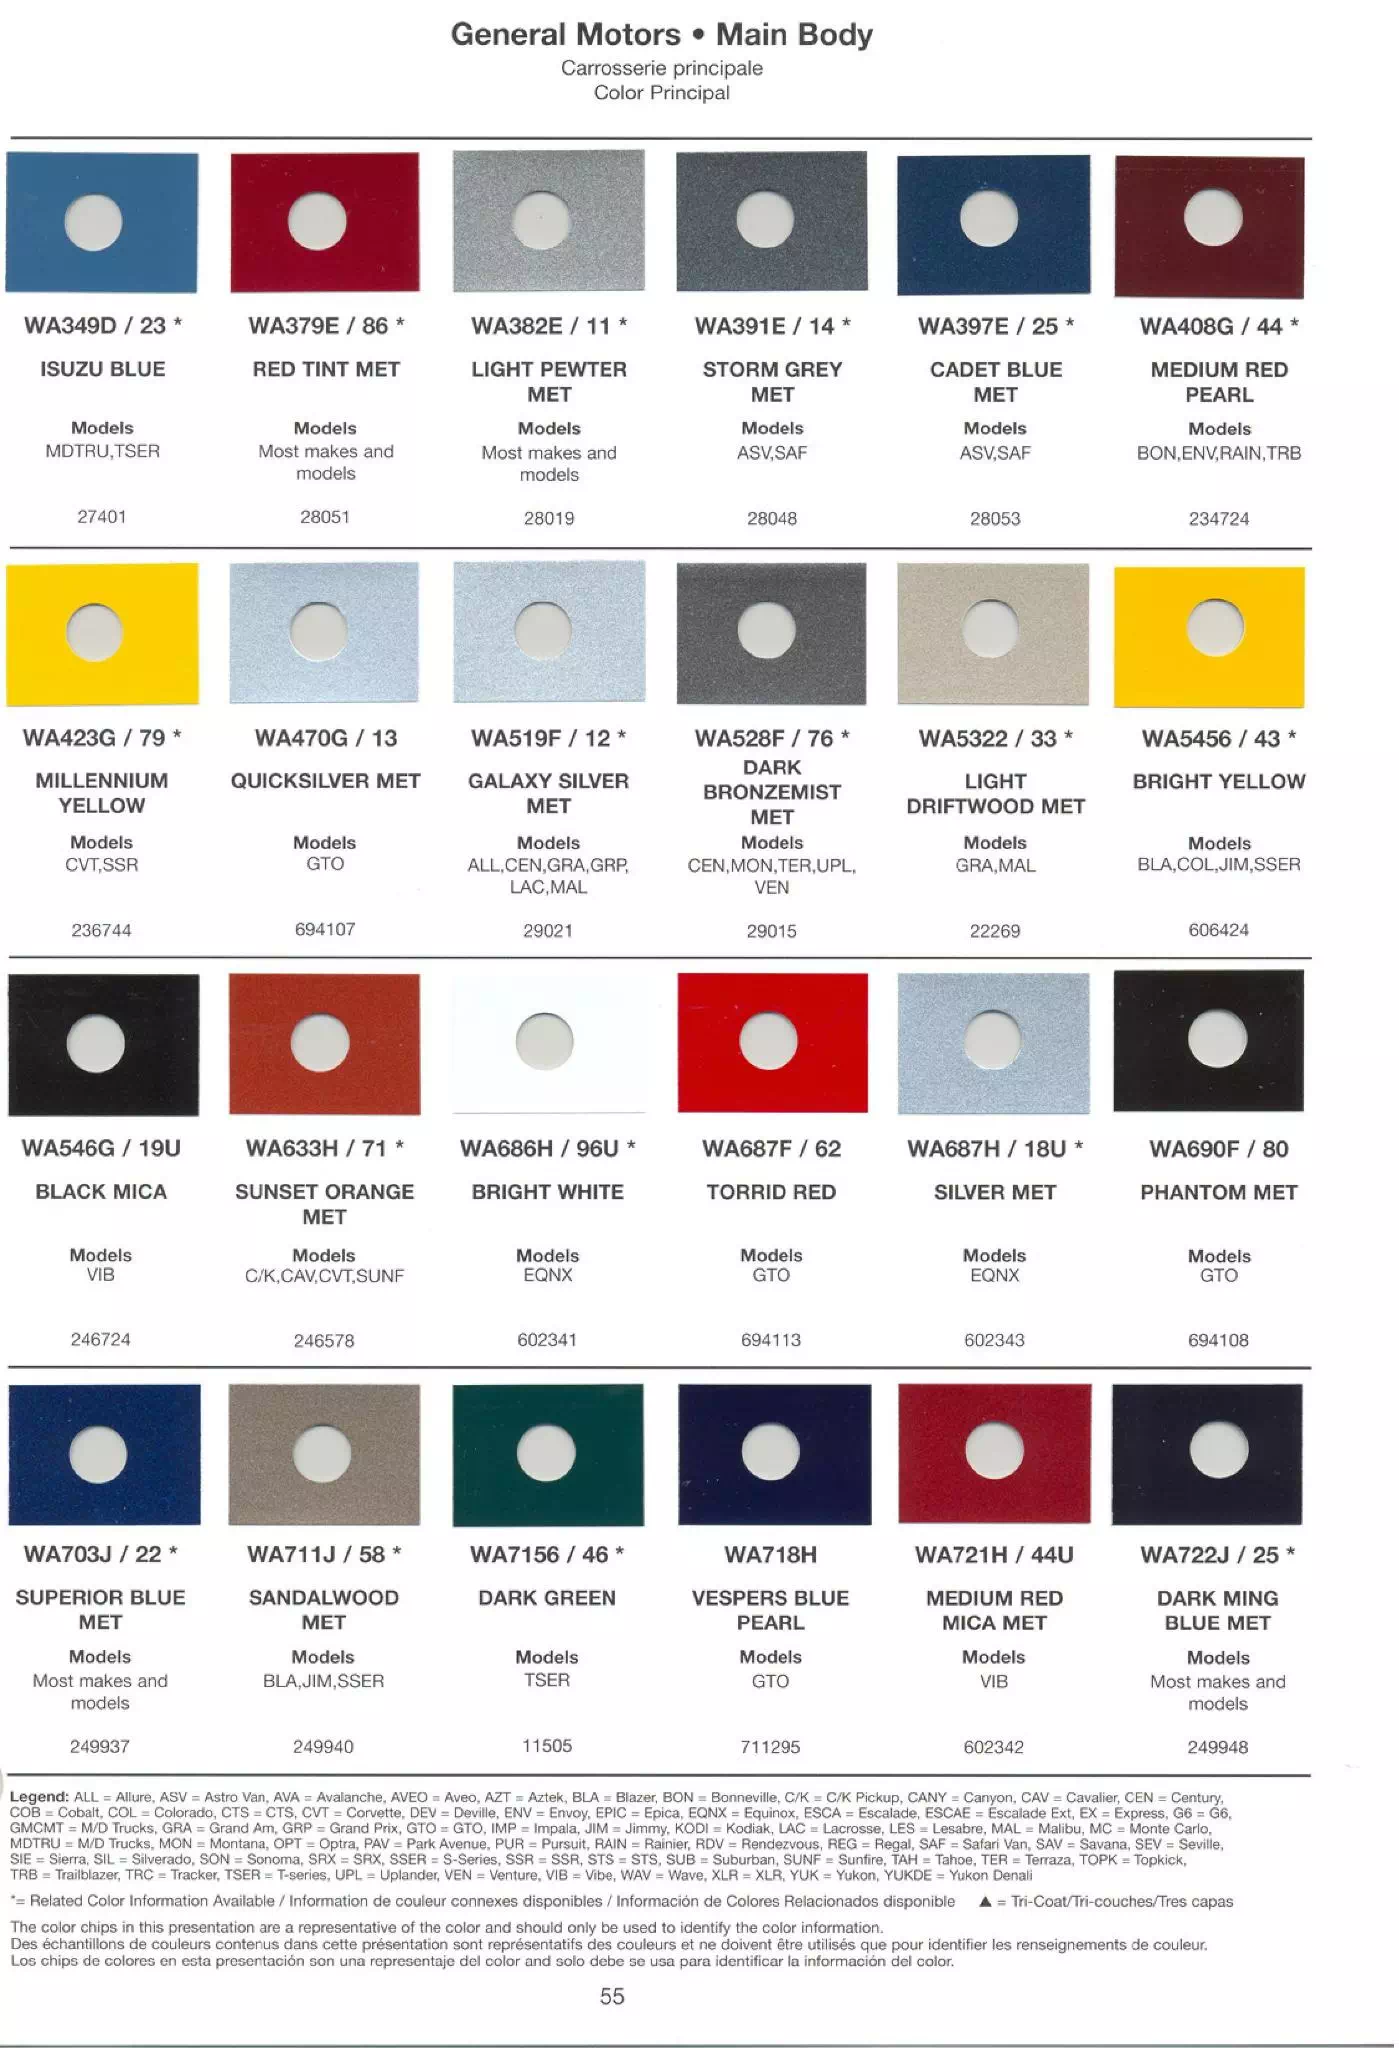 Color Chart and Paint Codes used on all General Motor Vehicles in 2005